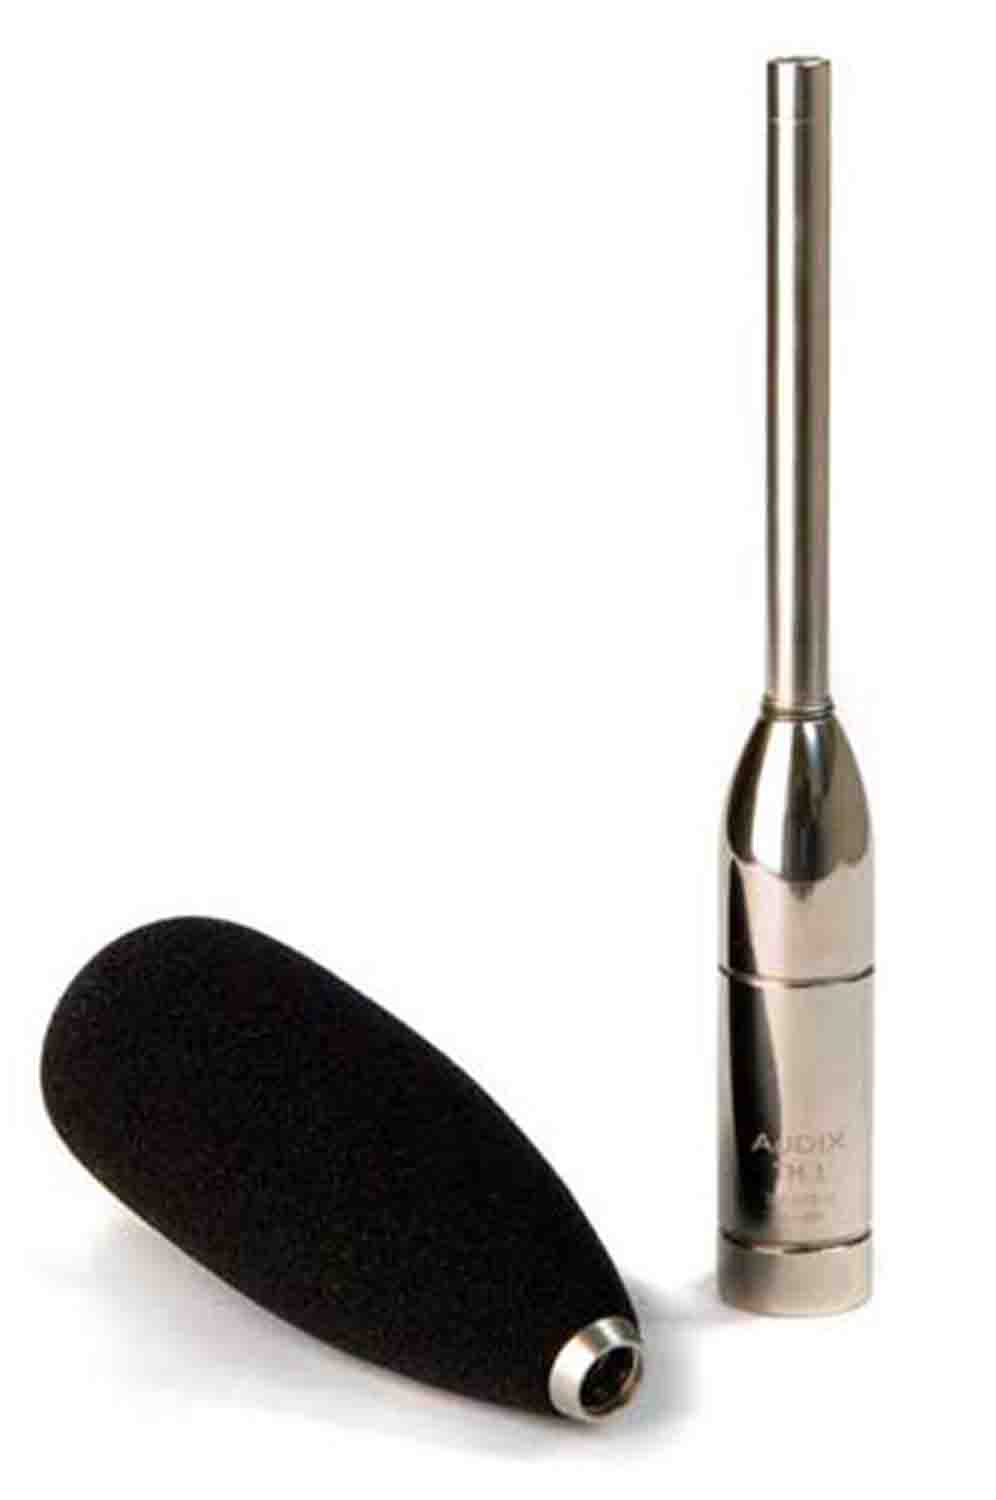 Audix TM1 Omnidirectional Test and Measurement Condenser Microphone - Hollywood DJ